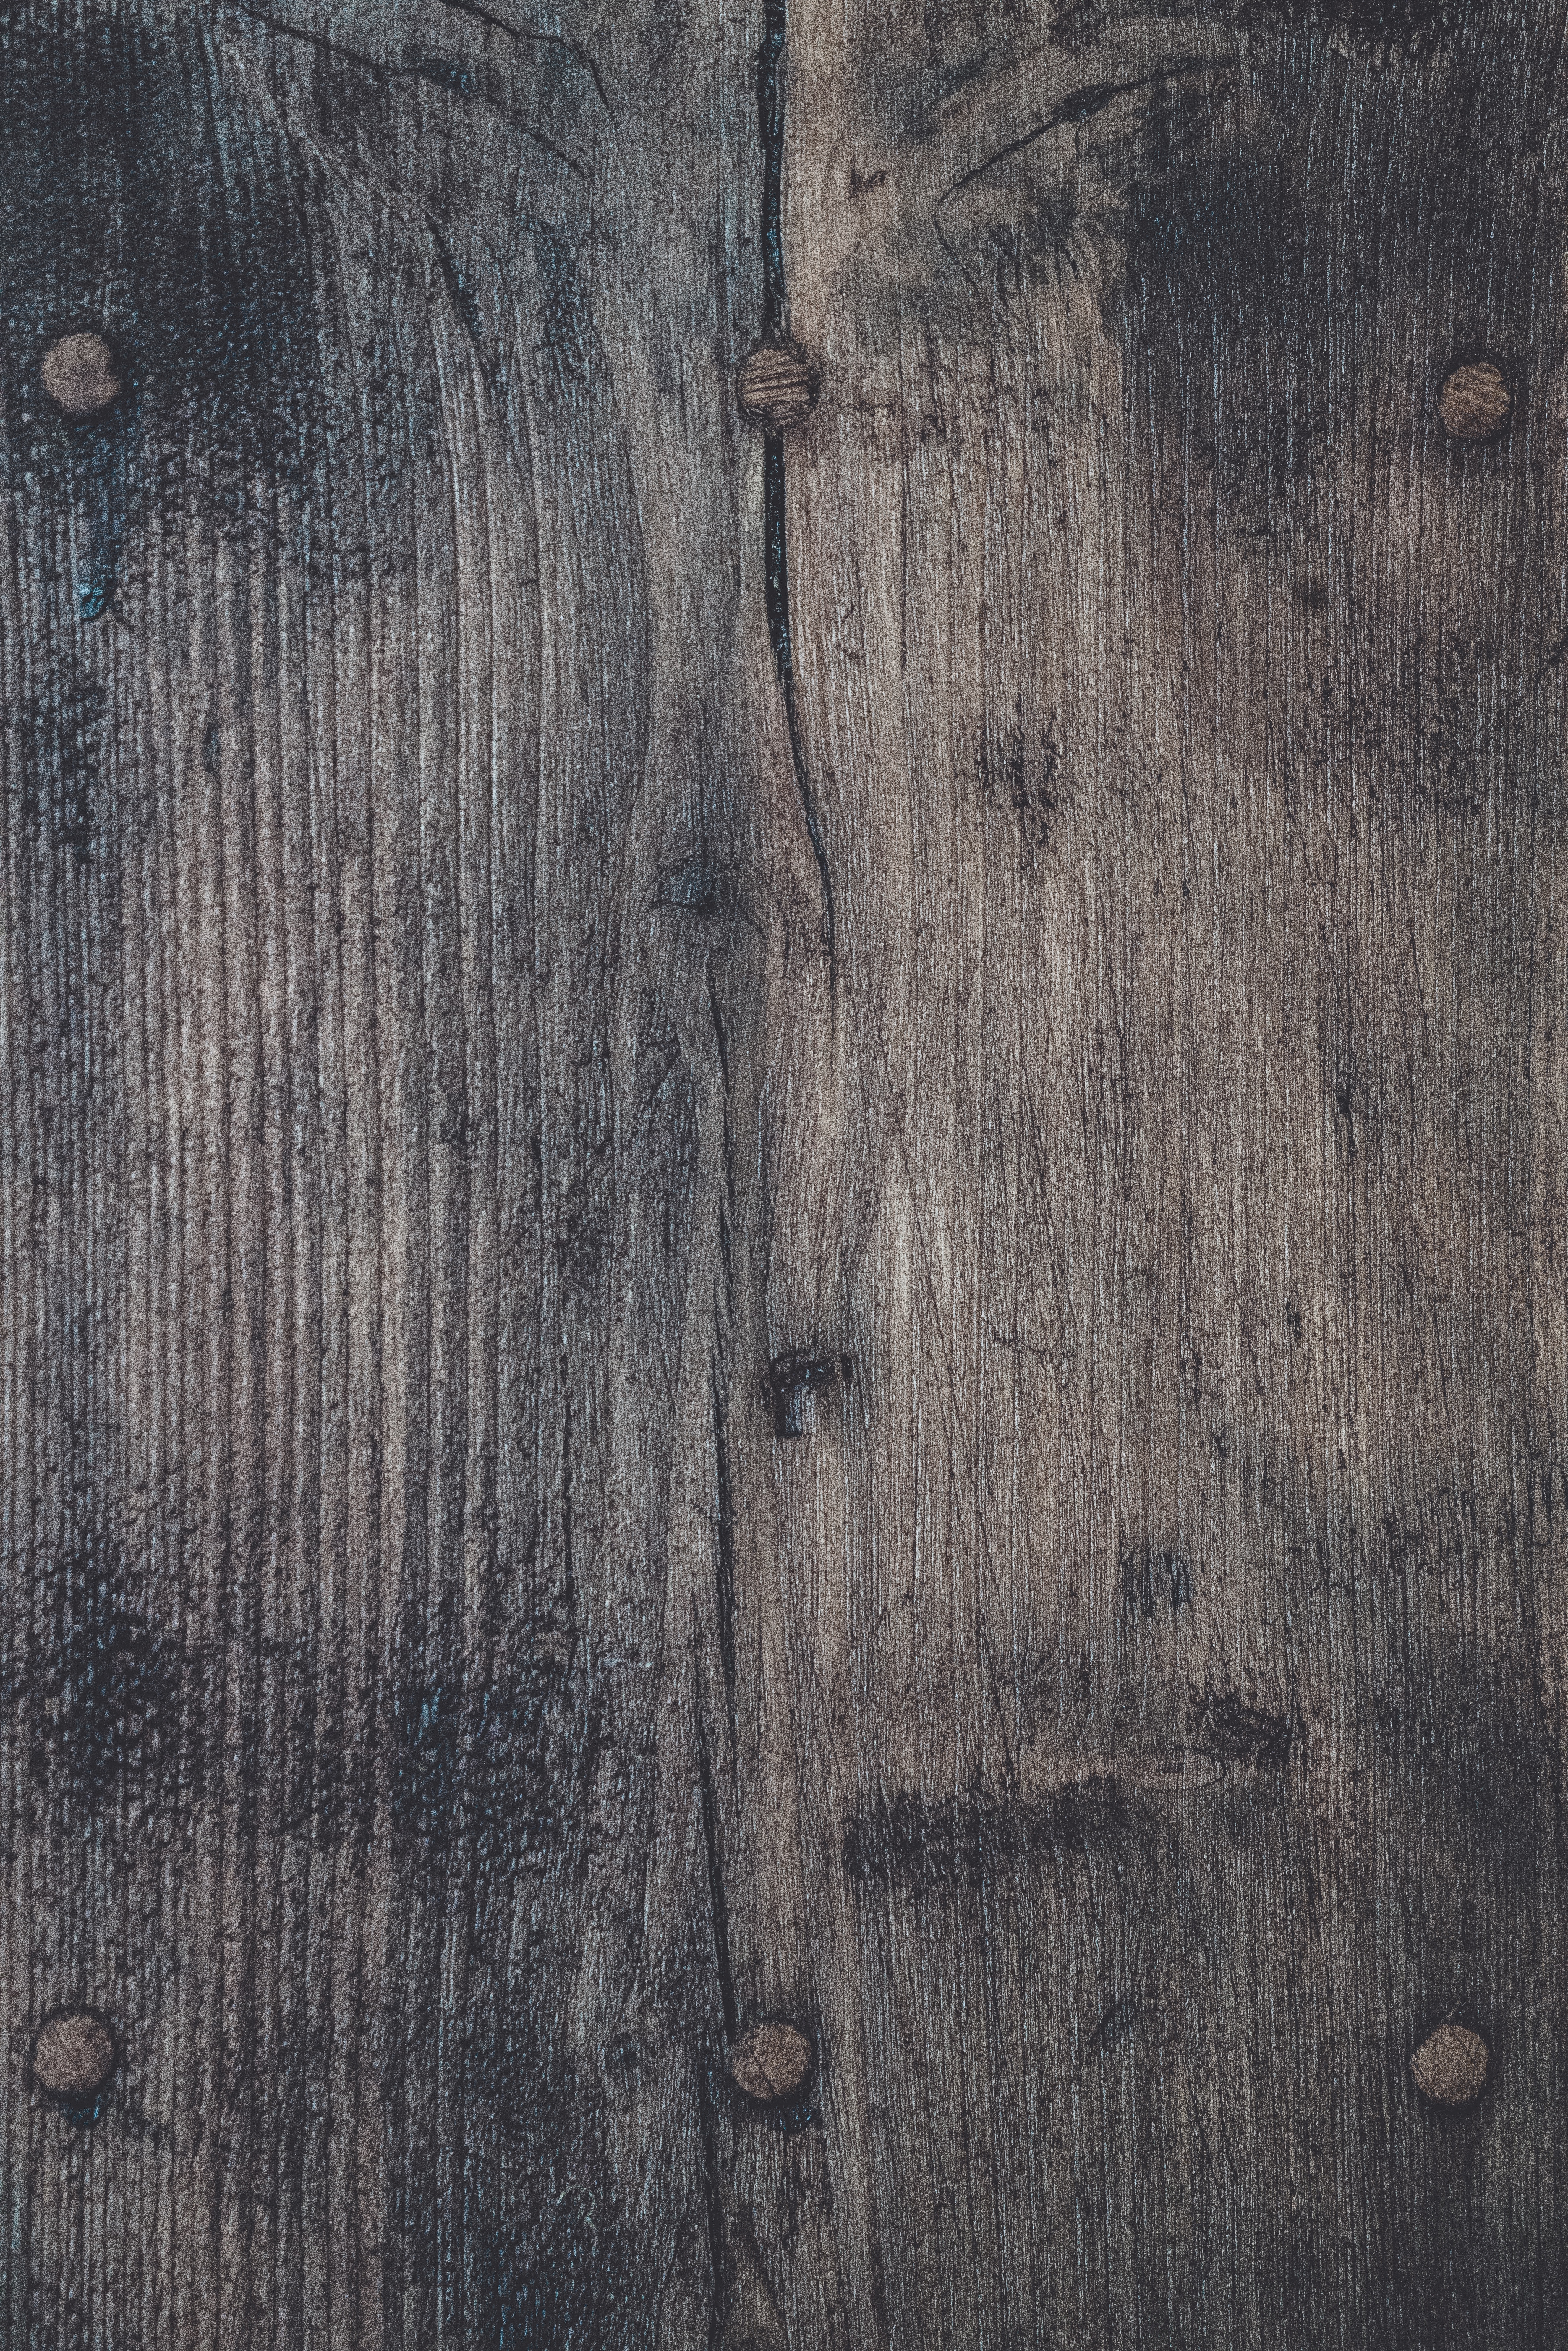 texture, ribbed, textures, surface, wood, wooden cellphone